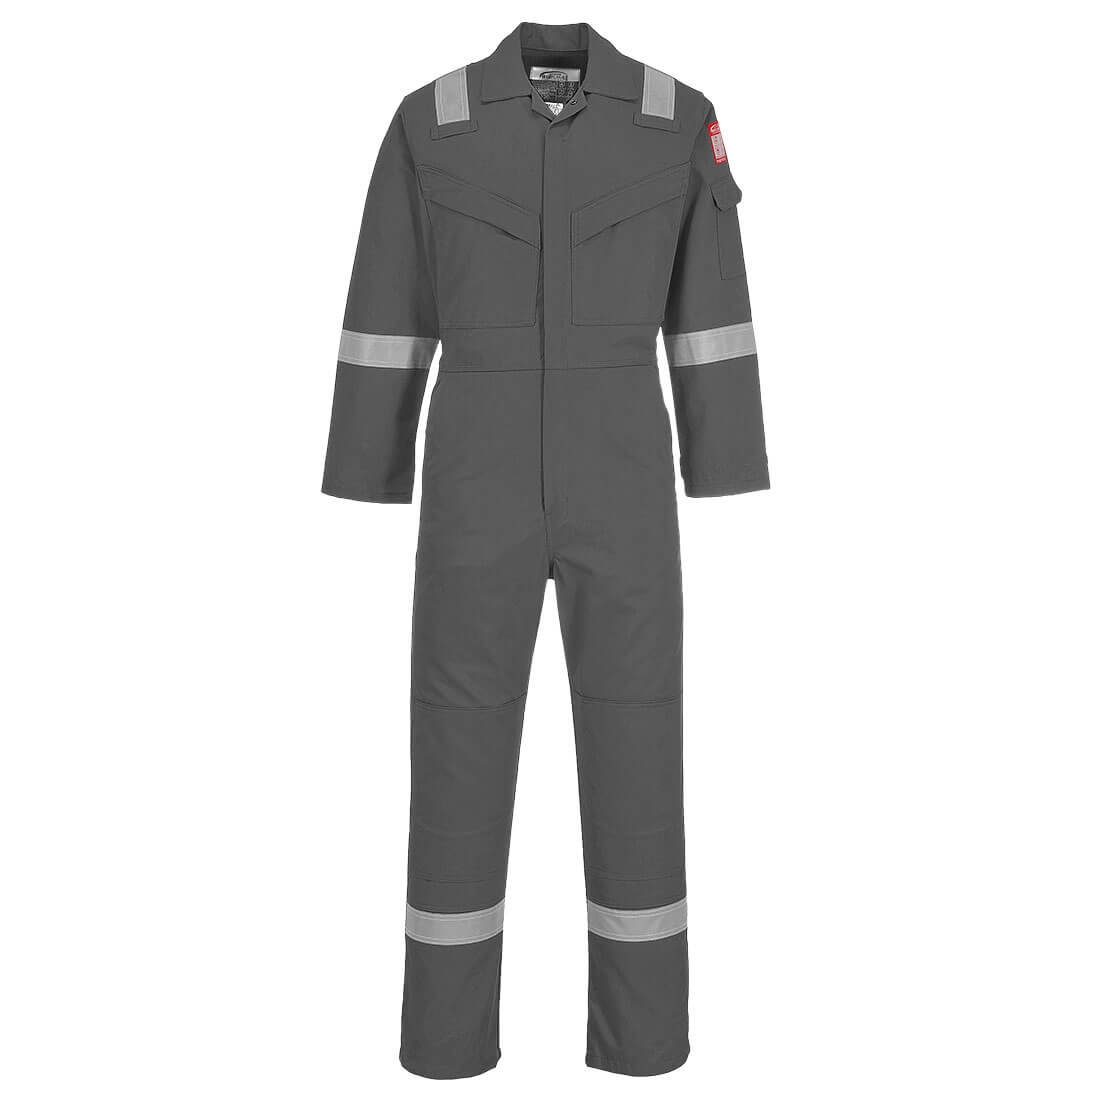 Image of Biz Flame Mens Aberdeen Flame Resistant Antistatic Coverall Grey 3XL 32"